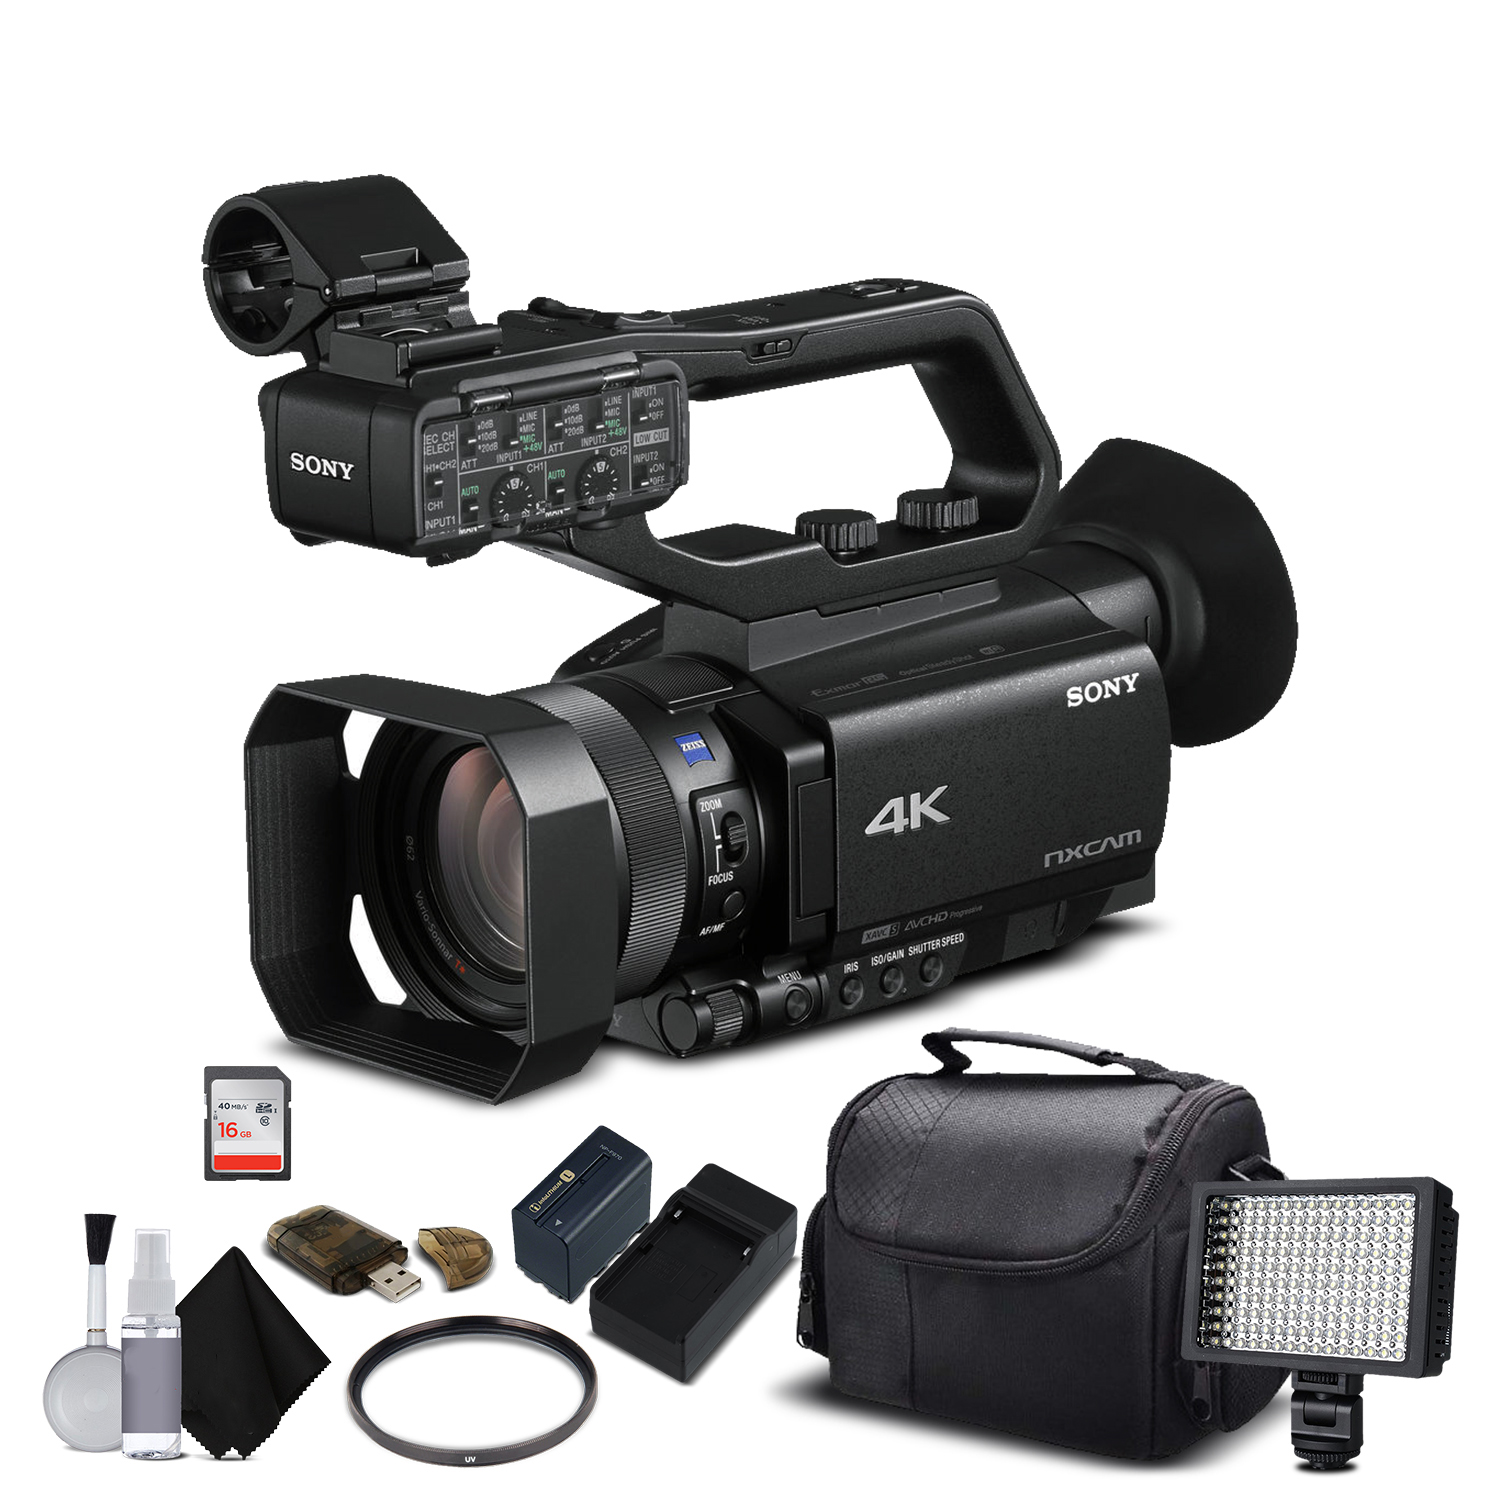 Sony HXR-NX80 4K HD NXCAM Camcorder Professional Bundle 01 - image 1 of 4